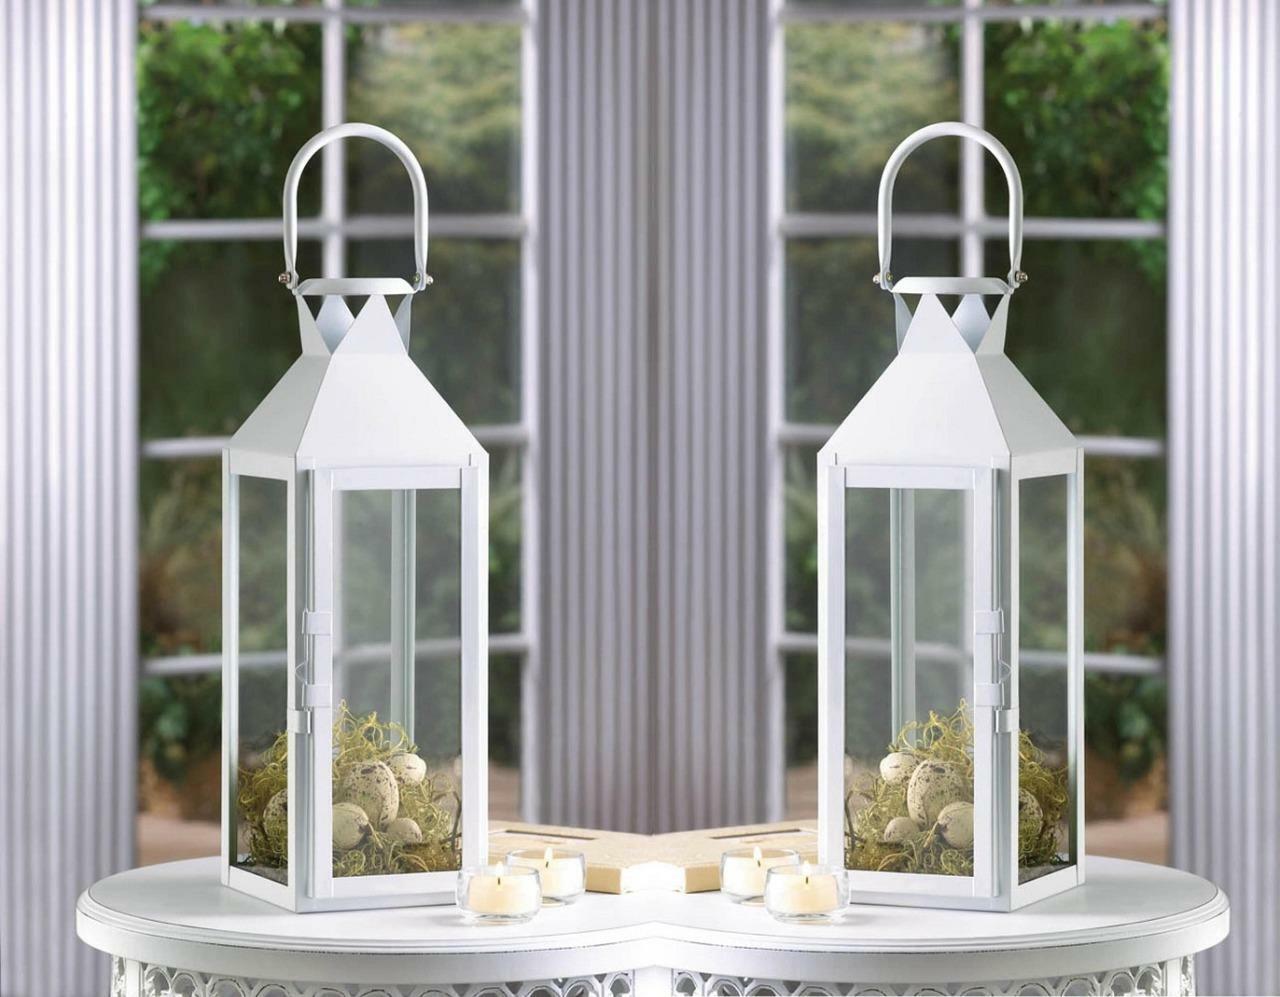 8 Lot Large 15" White Tall Candle Holder Lantern Lamp Wedding Table Centerpiece